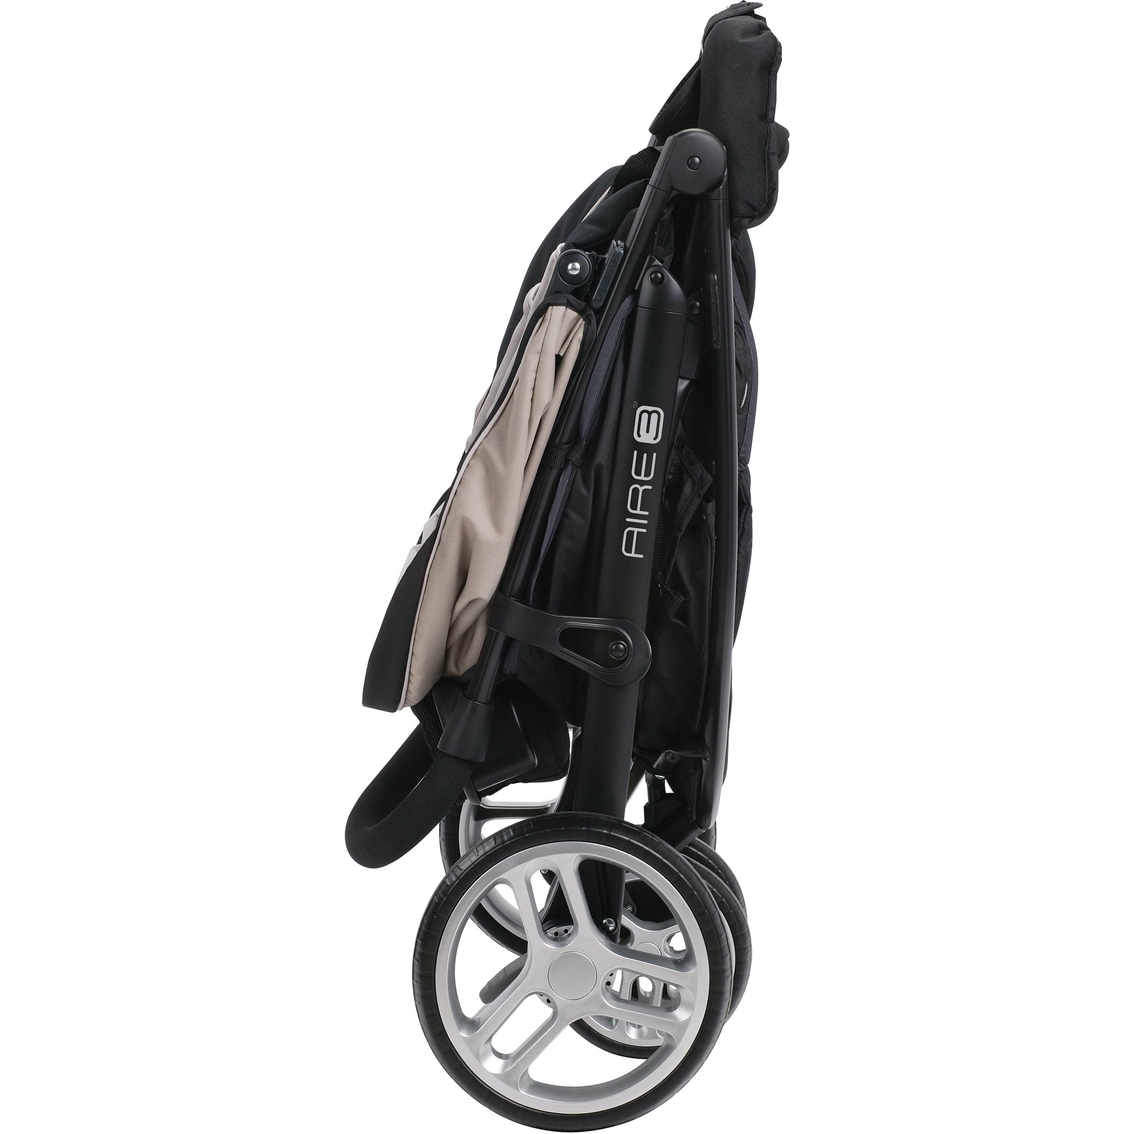 Graco Aire3 Click Connect Stroller - Image 3 of 3